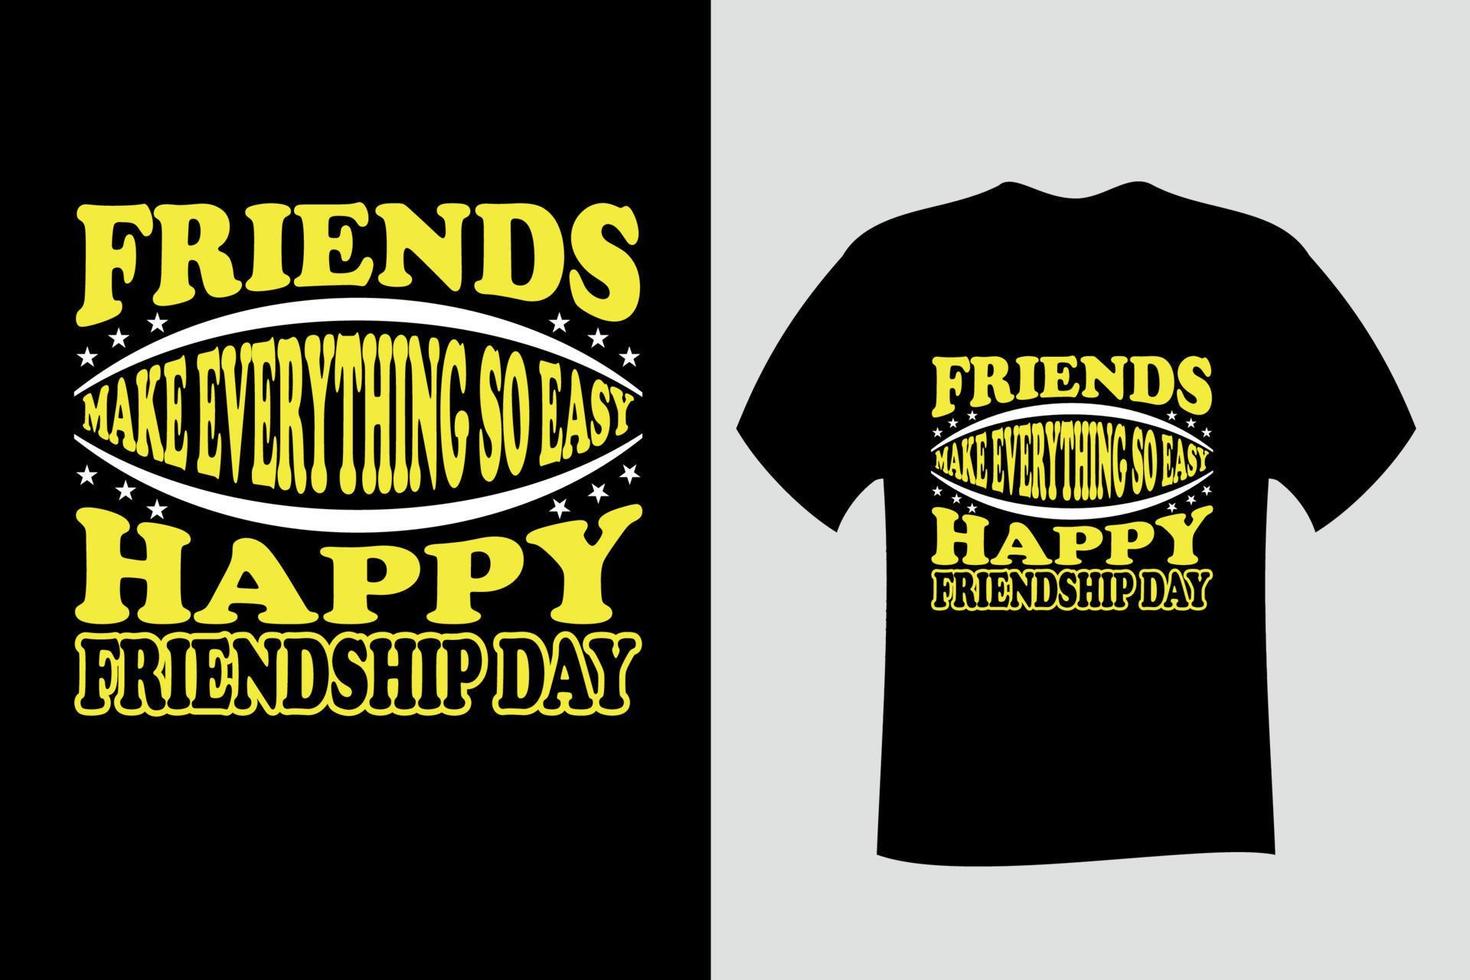 Friends make everything so easy happy friendship day T shirt vector